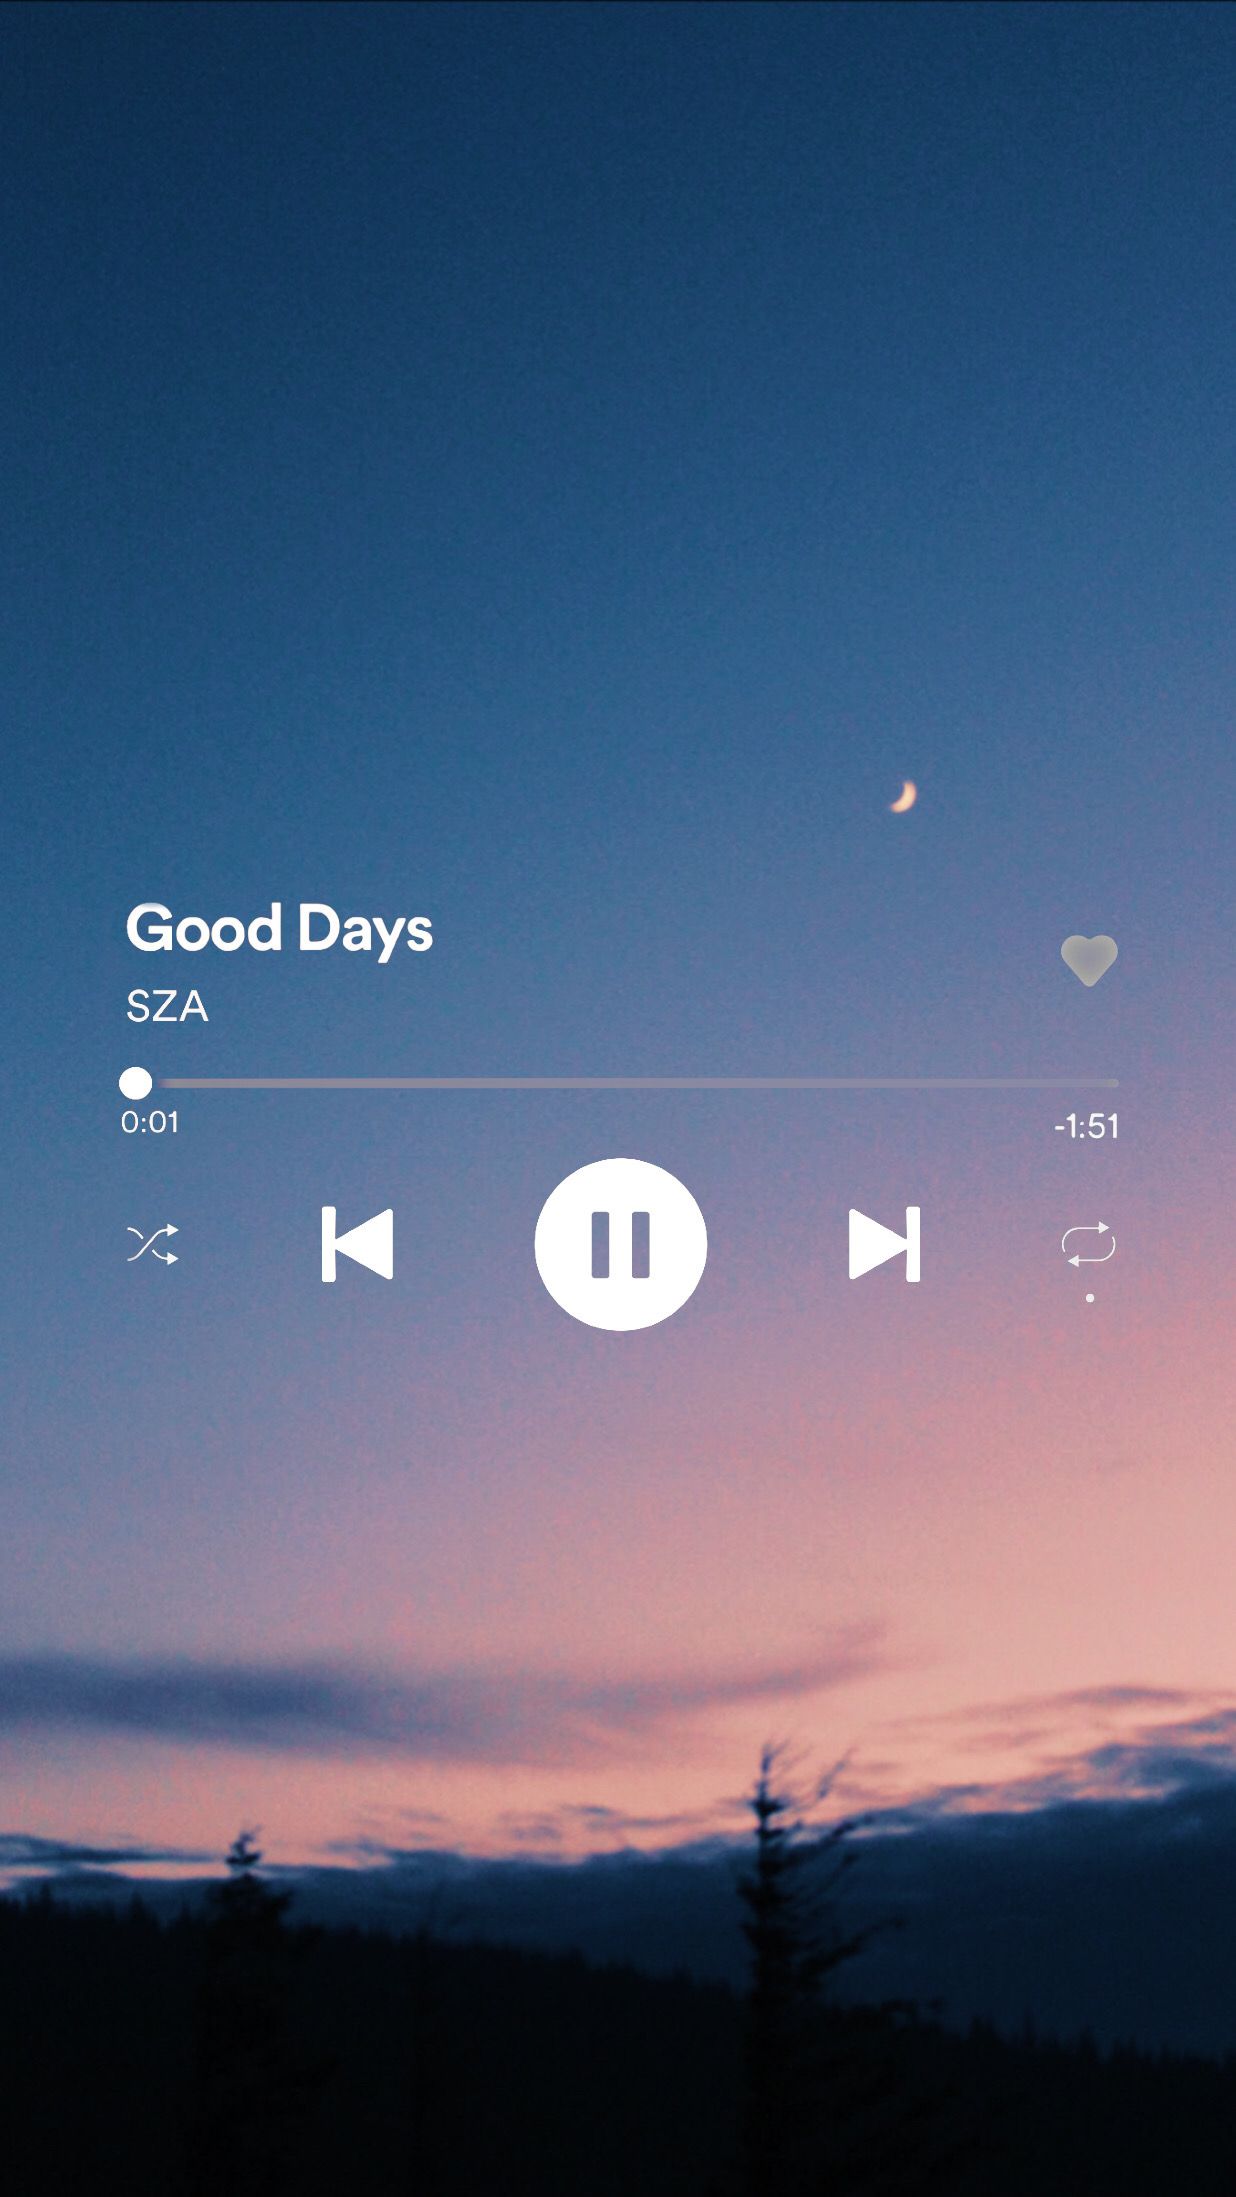 sza #spotify #gooddays #sunset. Music collage, Music wallpaper, iPhone wallpaper tumblr aesthetic